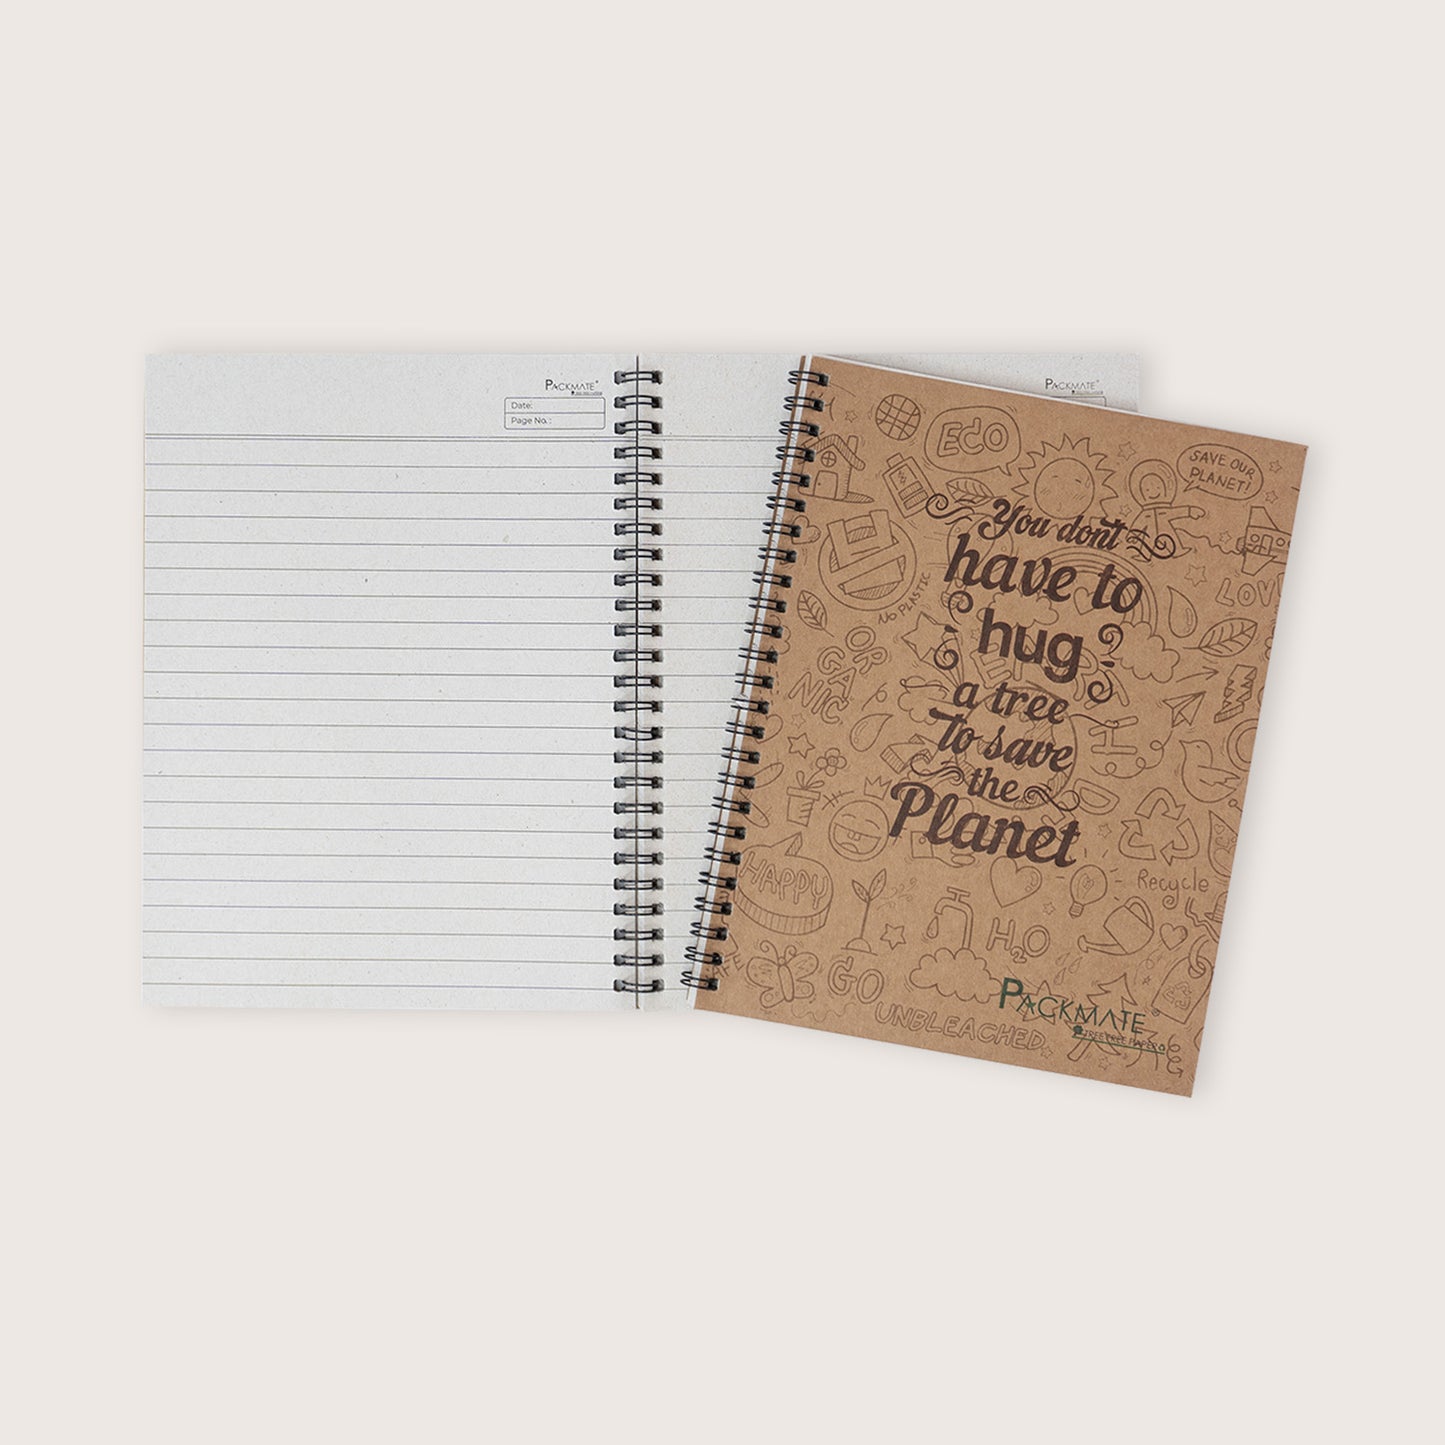 Packmate Spiral Notebook - Ruled (Pack of 5)  Made From 100% Recycled Paper